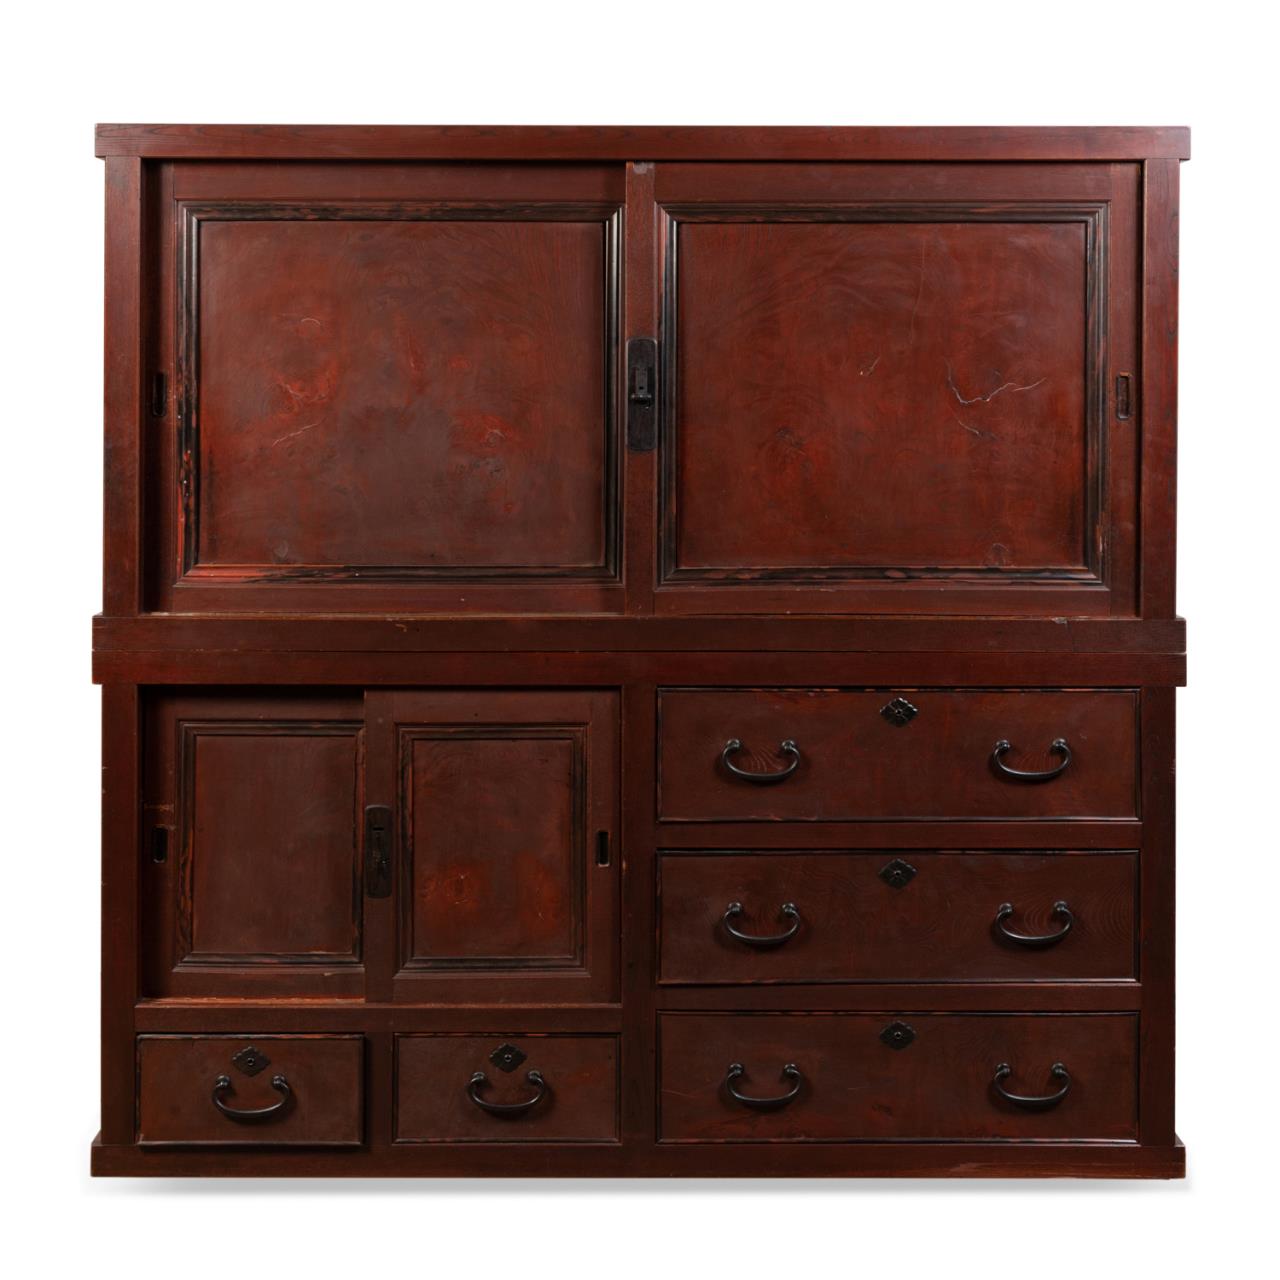 LARGE RED STAINED JAPANESE CABINET 29f52d